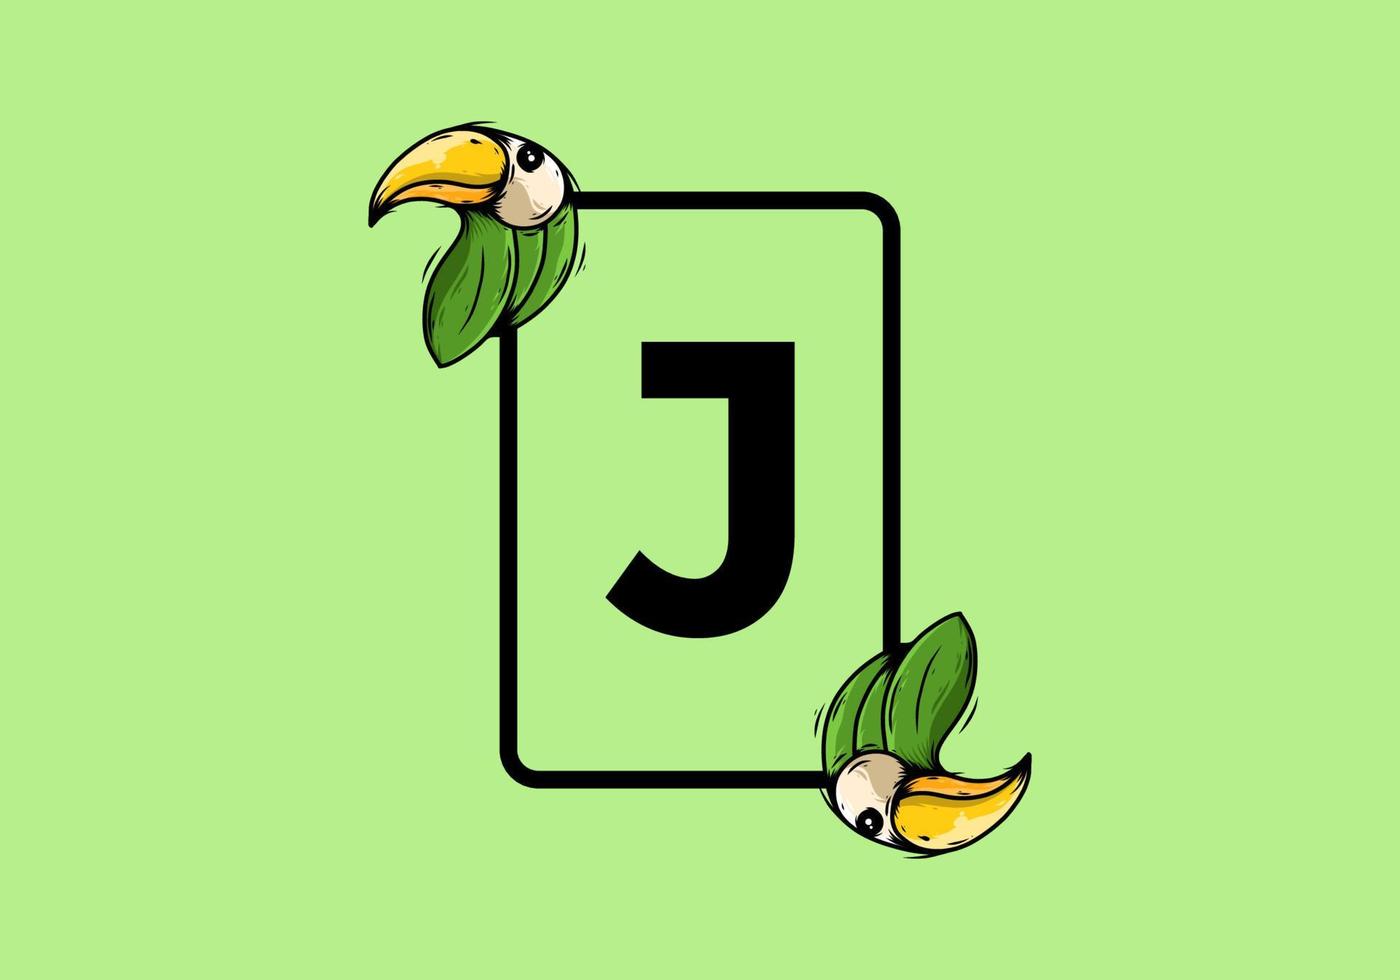 Green bird with J initial letter vector